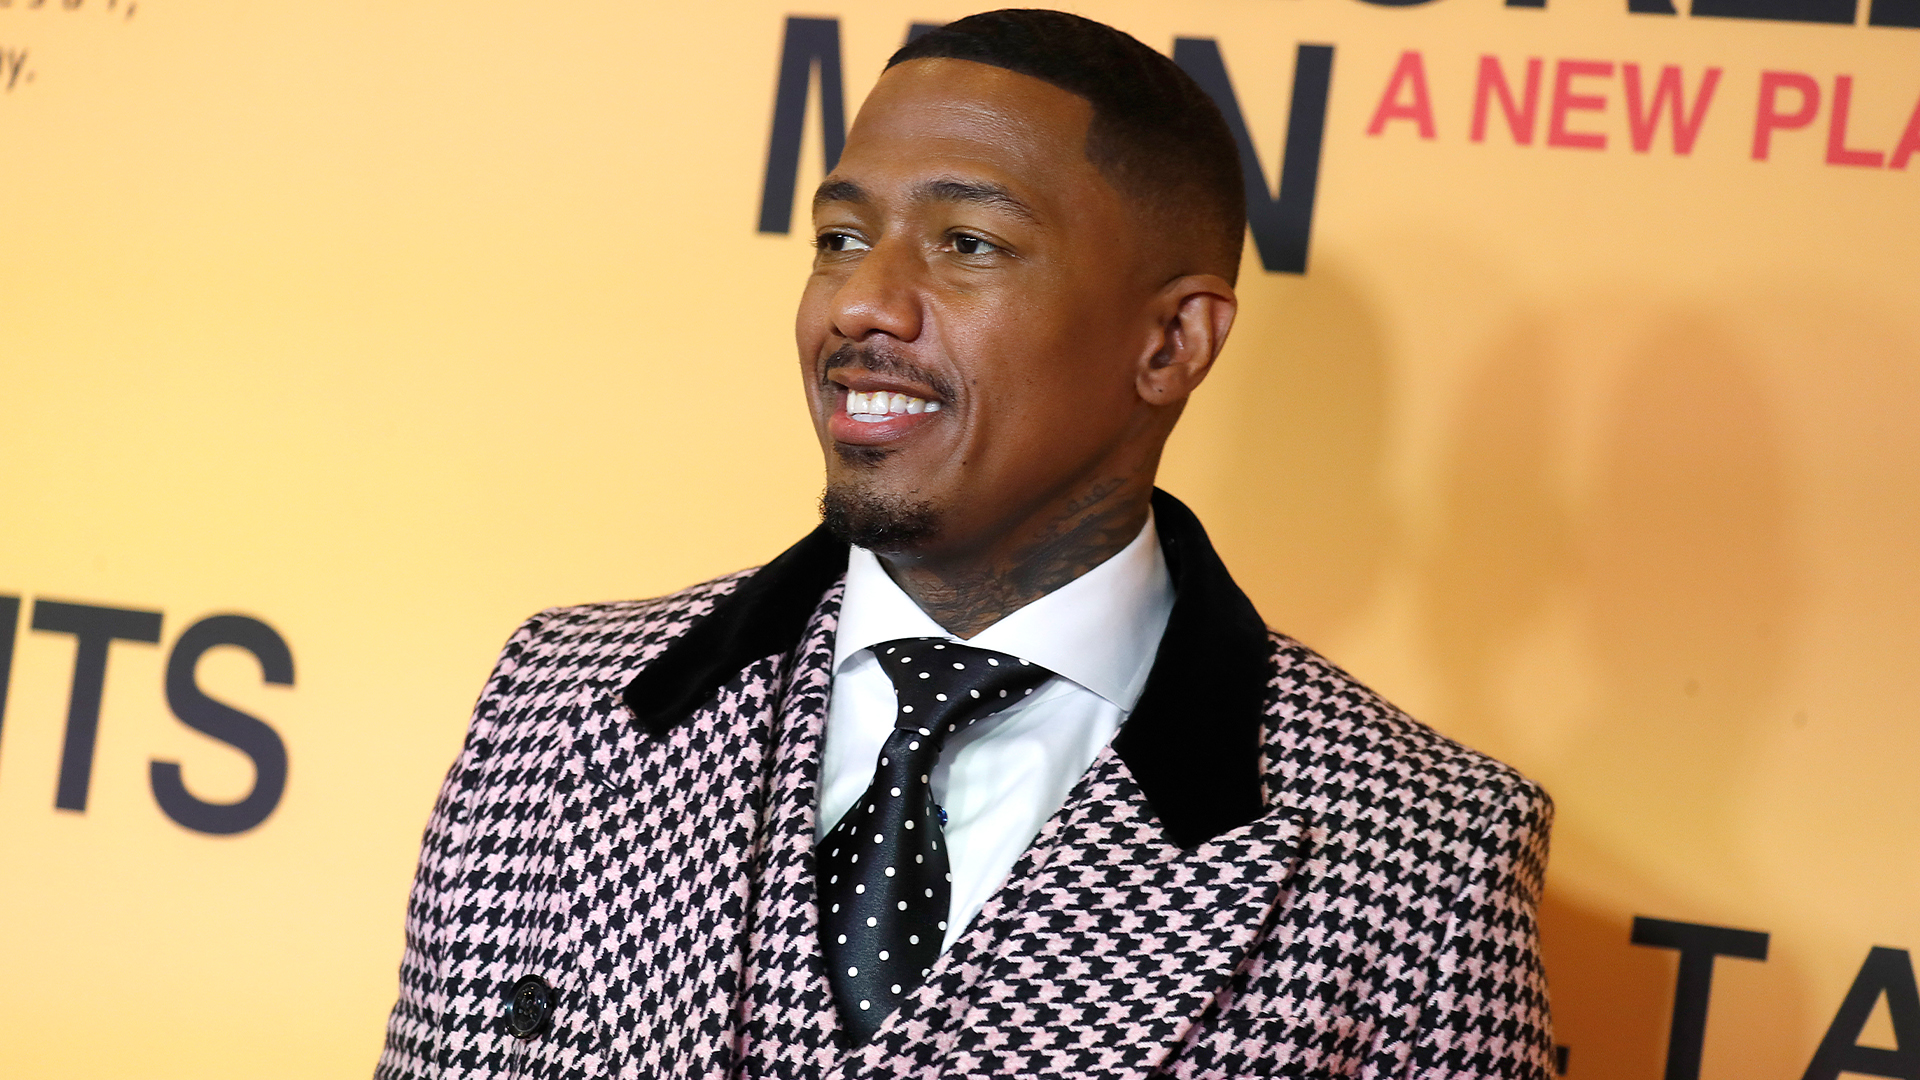 Exclusive: Nick Cannon Talks Turning 'Wild 'N Out' Into A 'Billion-Dollar Business,' Music And More